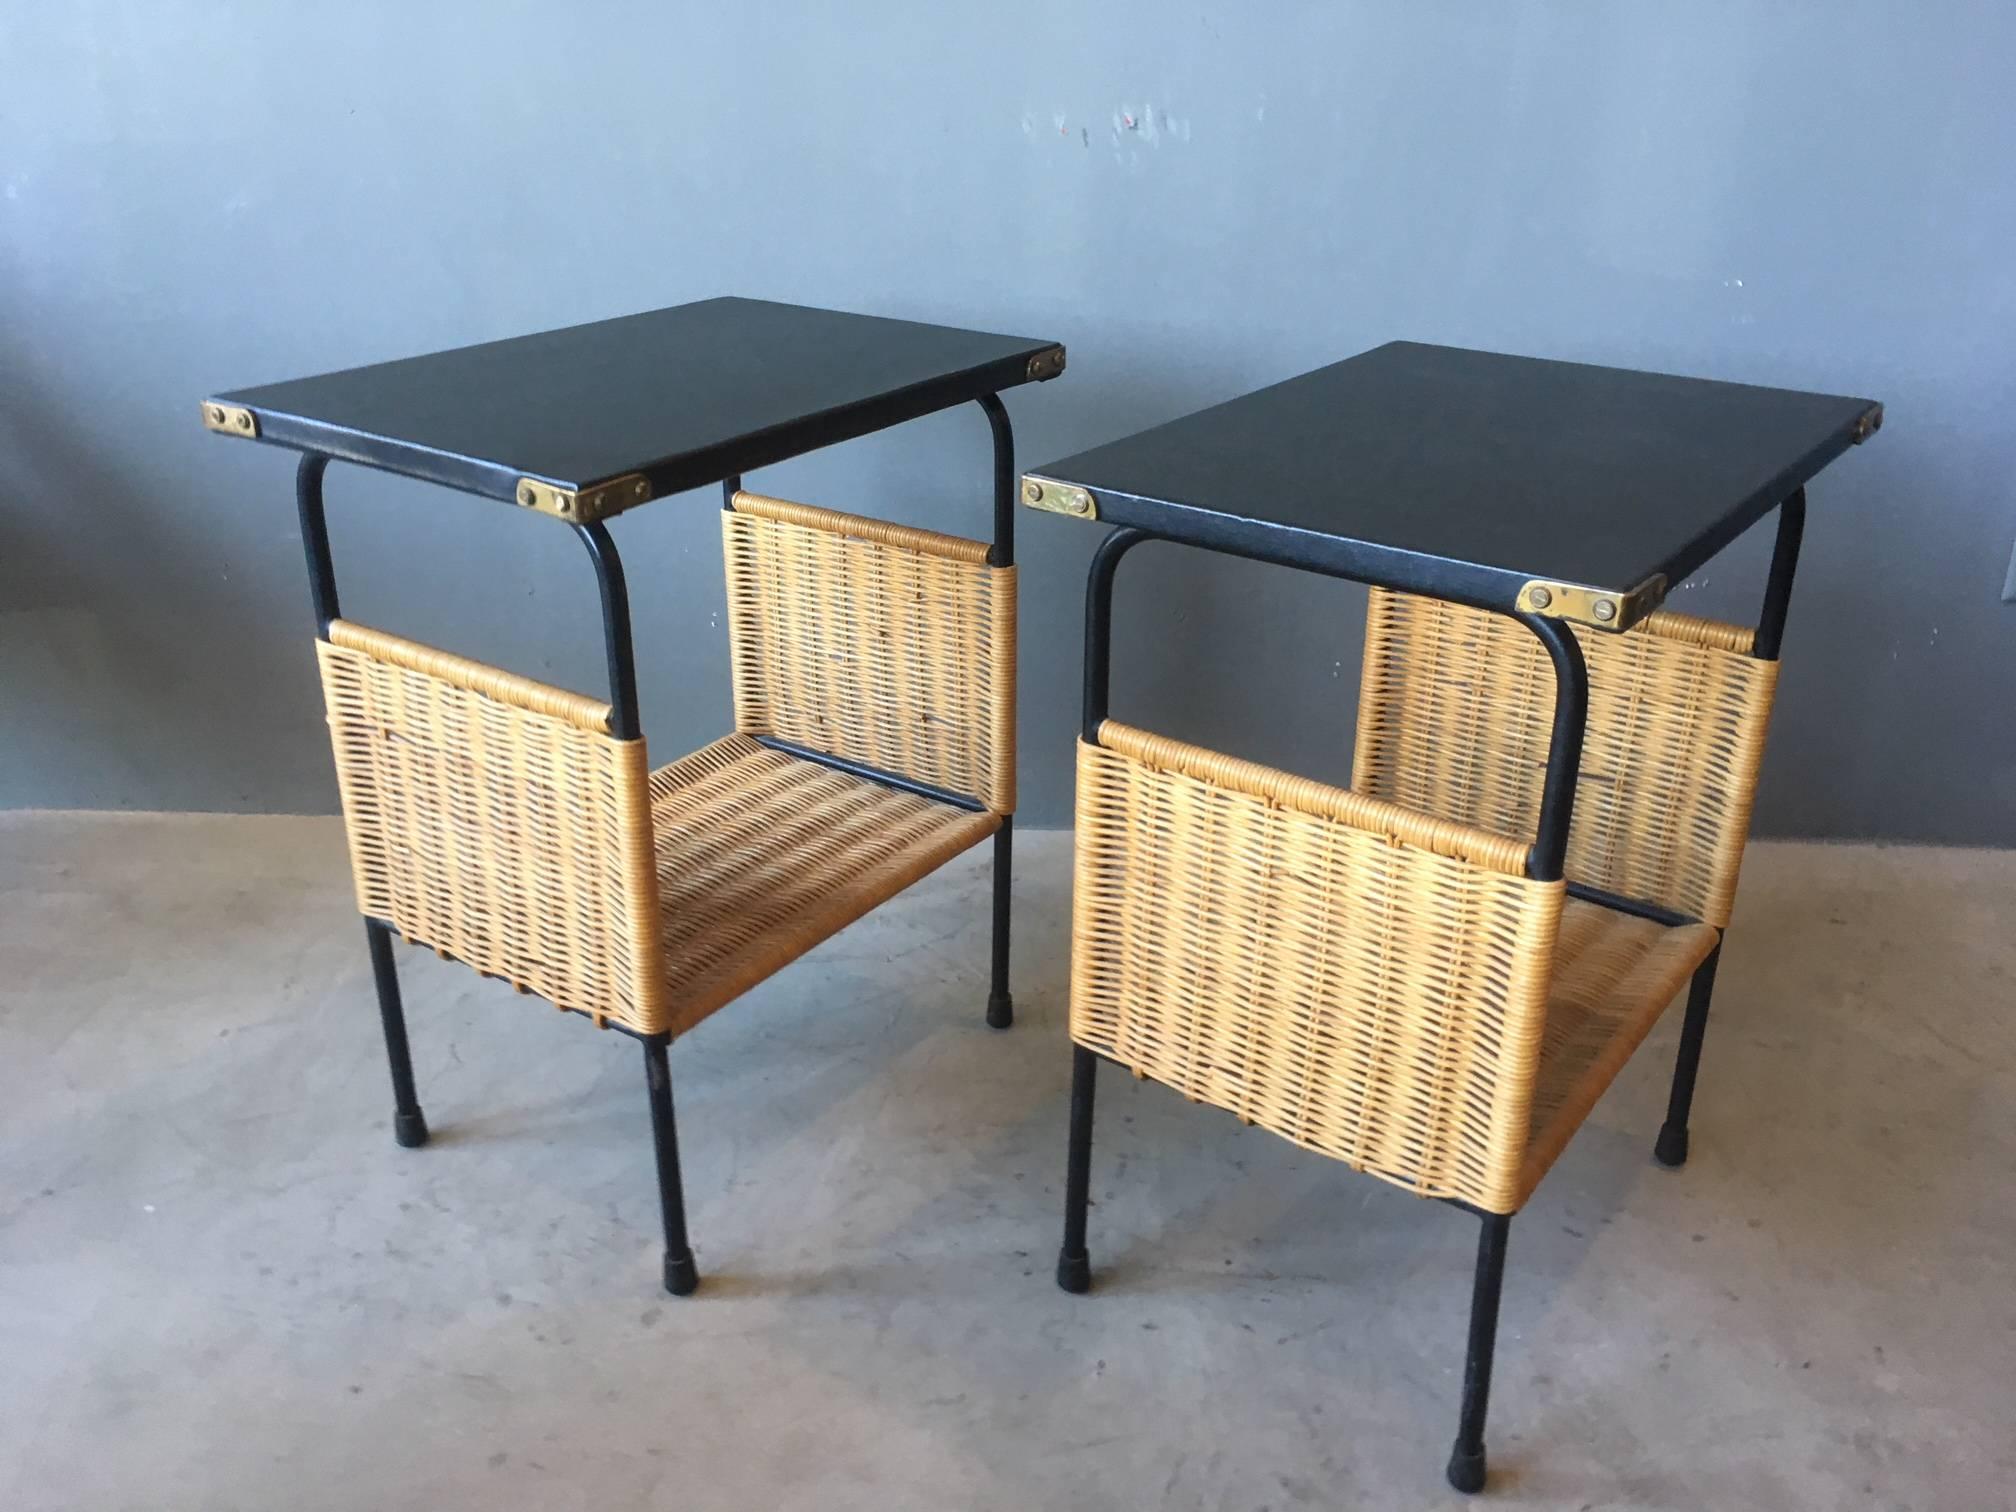 Stunning pair of leather and wicker side tables by Jacques Adnet. Iron legs with leather top and brass hardware. Wicker shelf. Perfect as nightstands or side tables. Never seen before. In extremely good, original condition. Gorgeous design.

Over 75